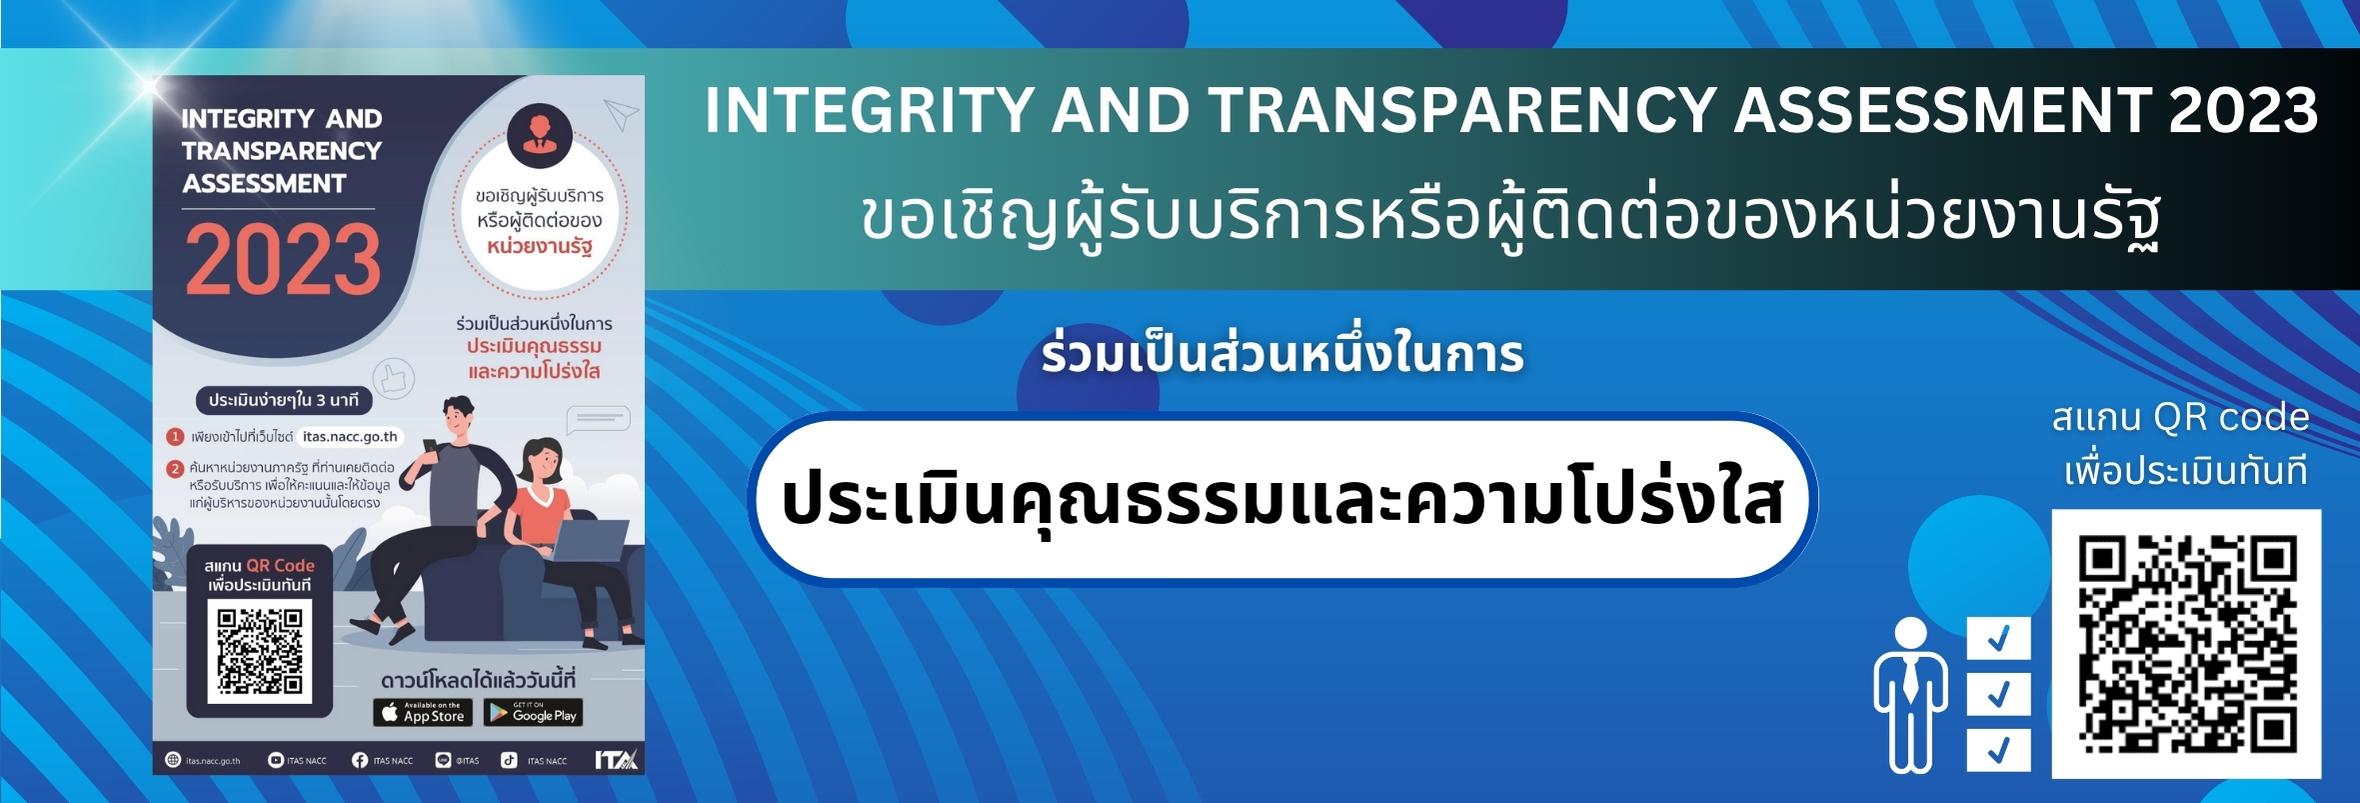 INTEGRITY AND TRANSPARENCY ASSESSMENT 2023 Banner